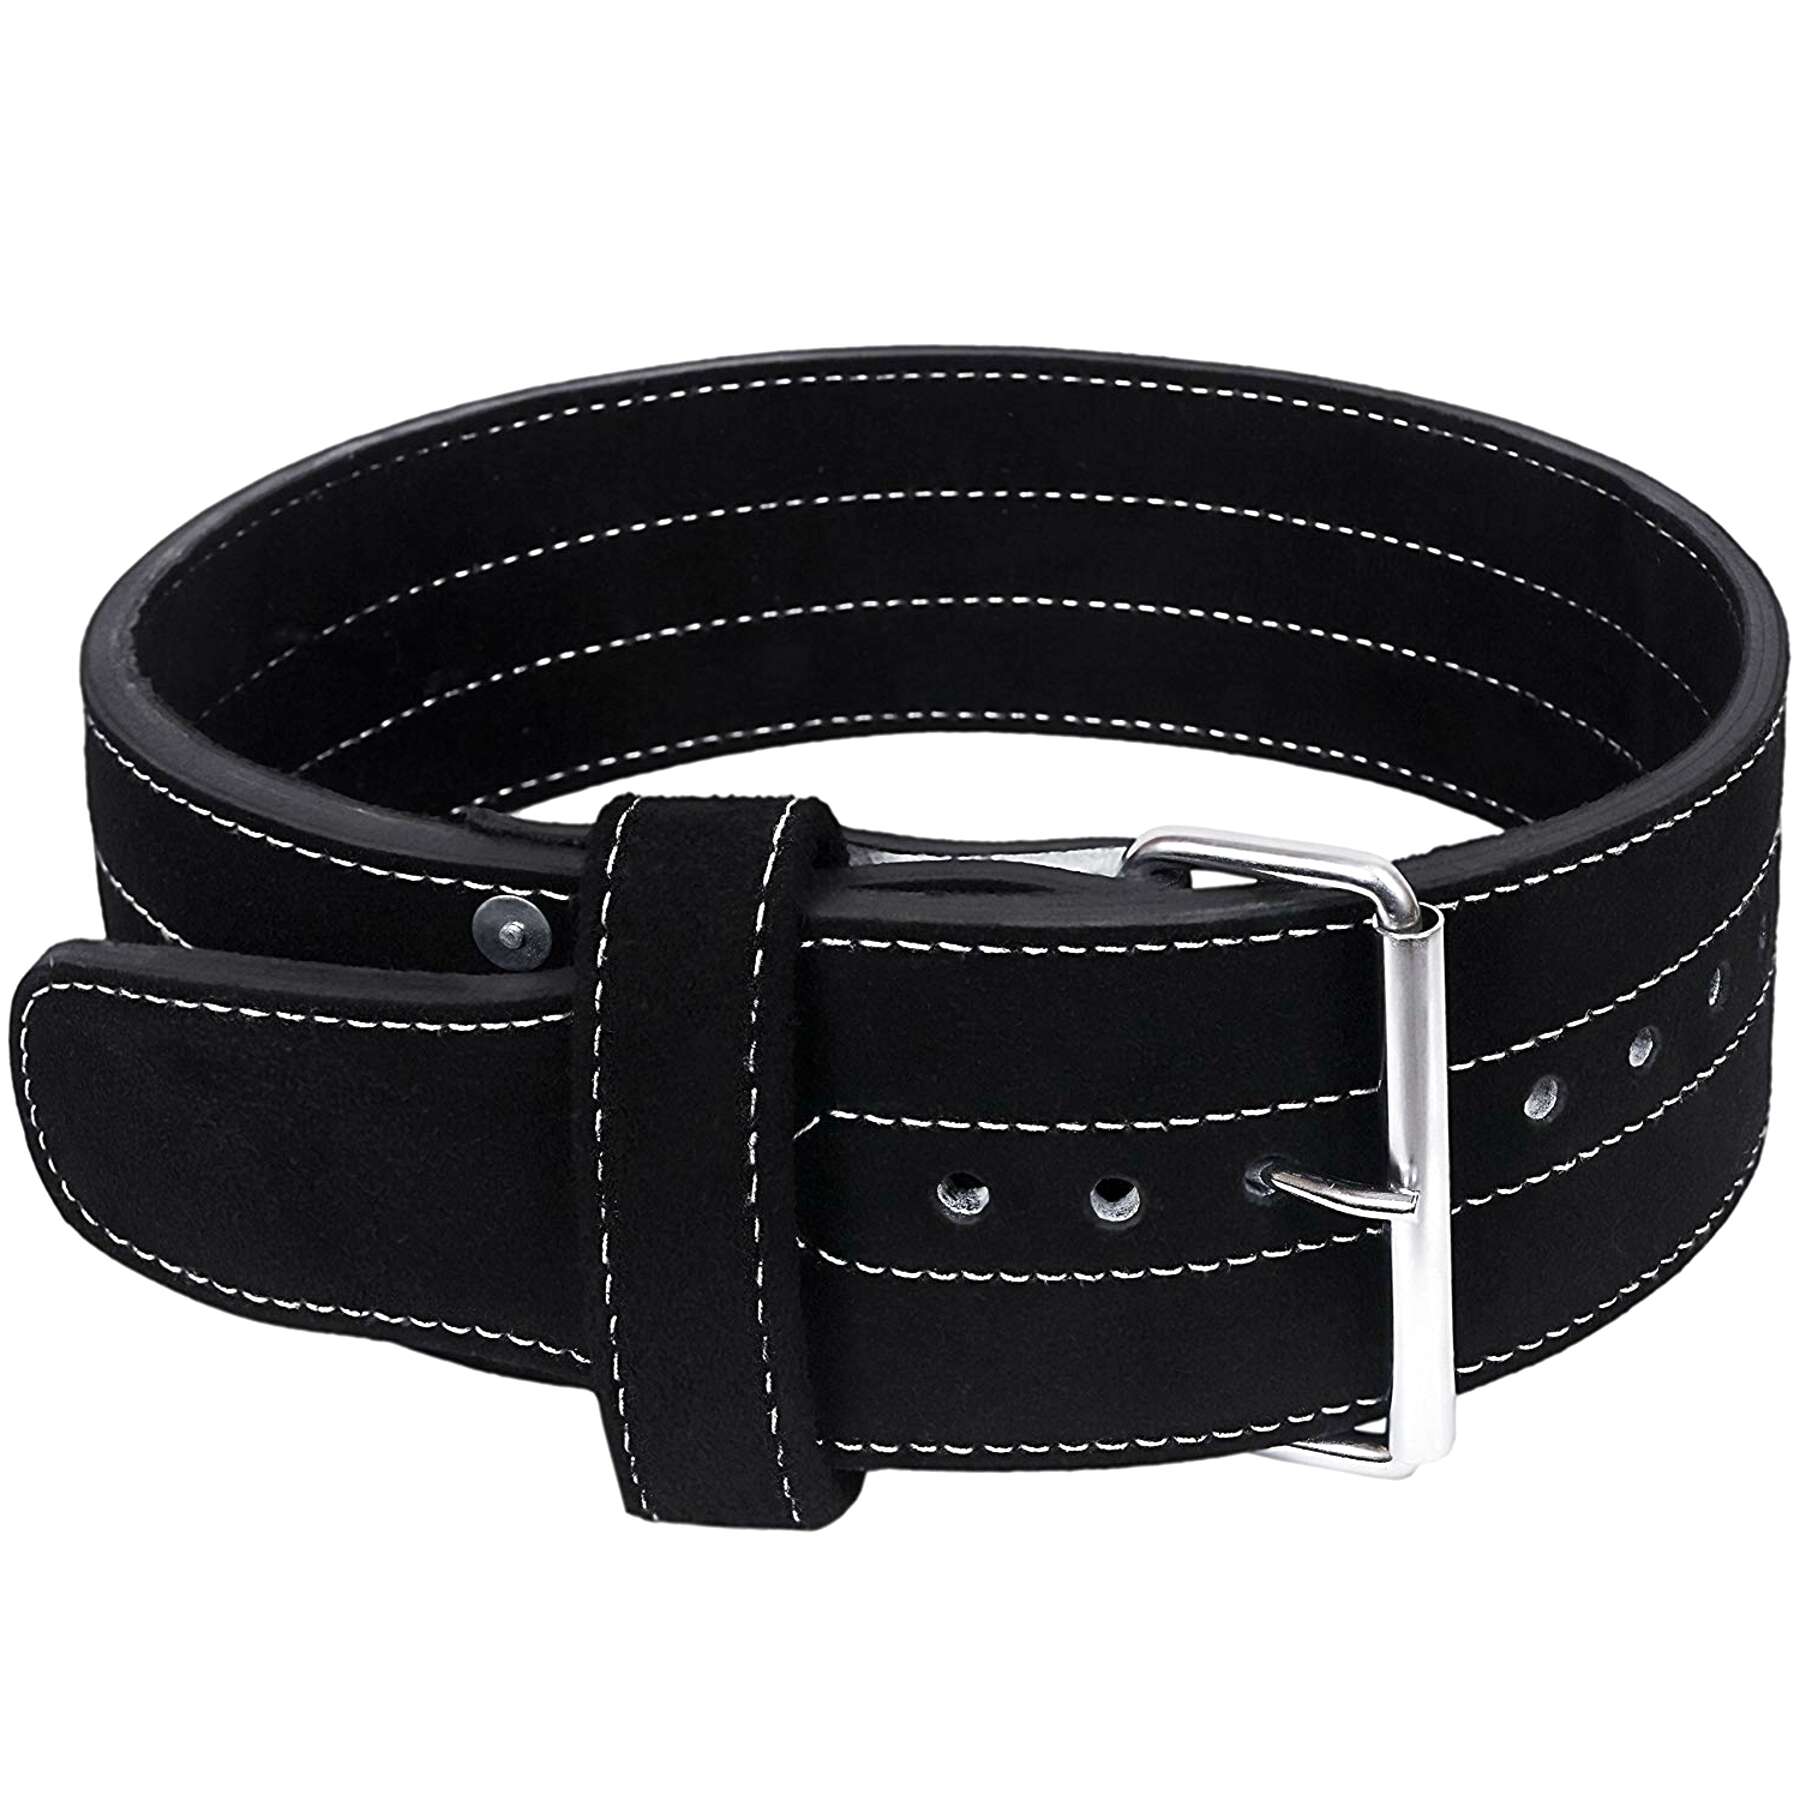 Powerlifting Belt for sale in UK | 62 used Powerlifting Belts